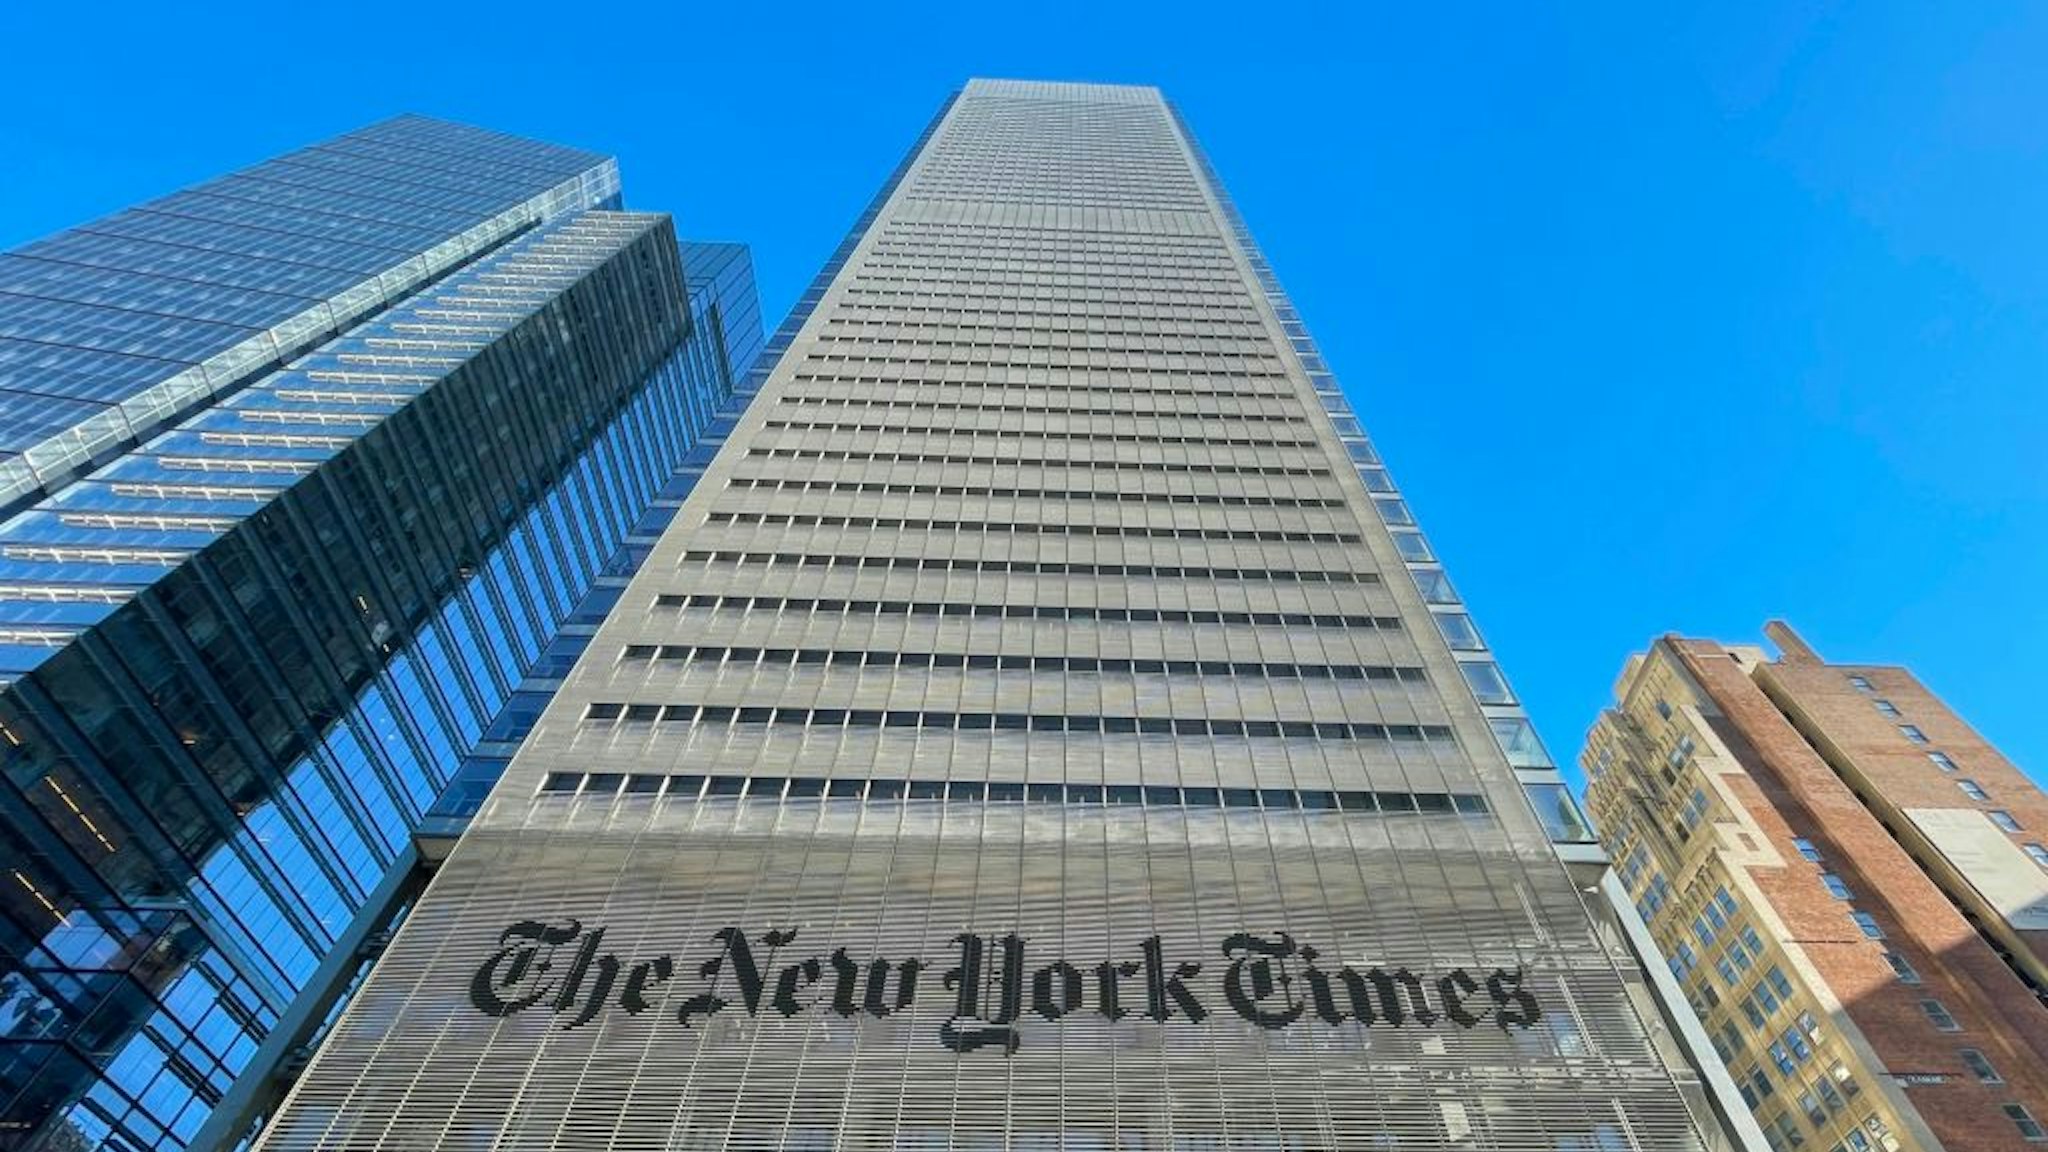 The New York Times Building is seen in New York City on February 4, 2021